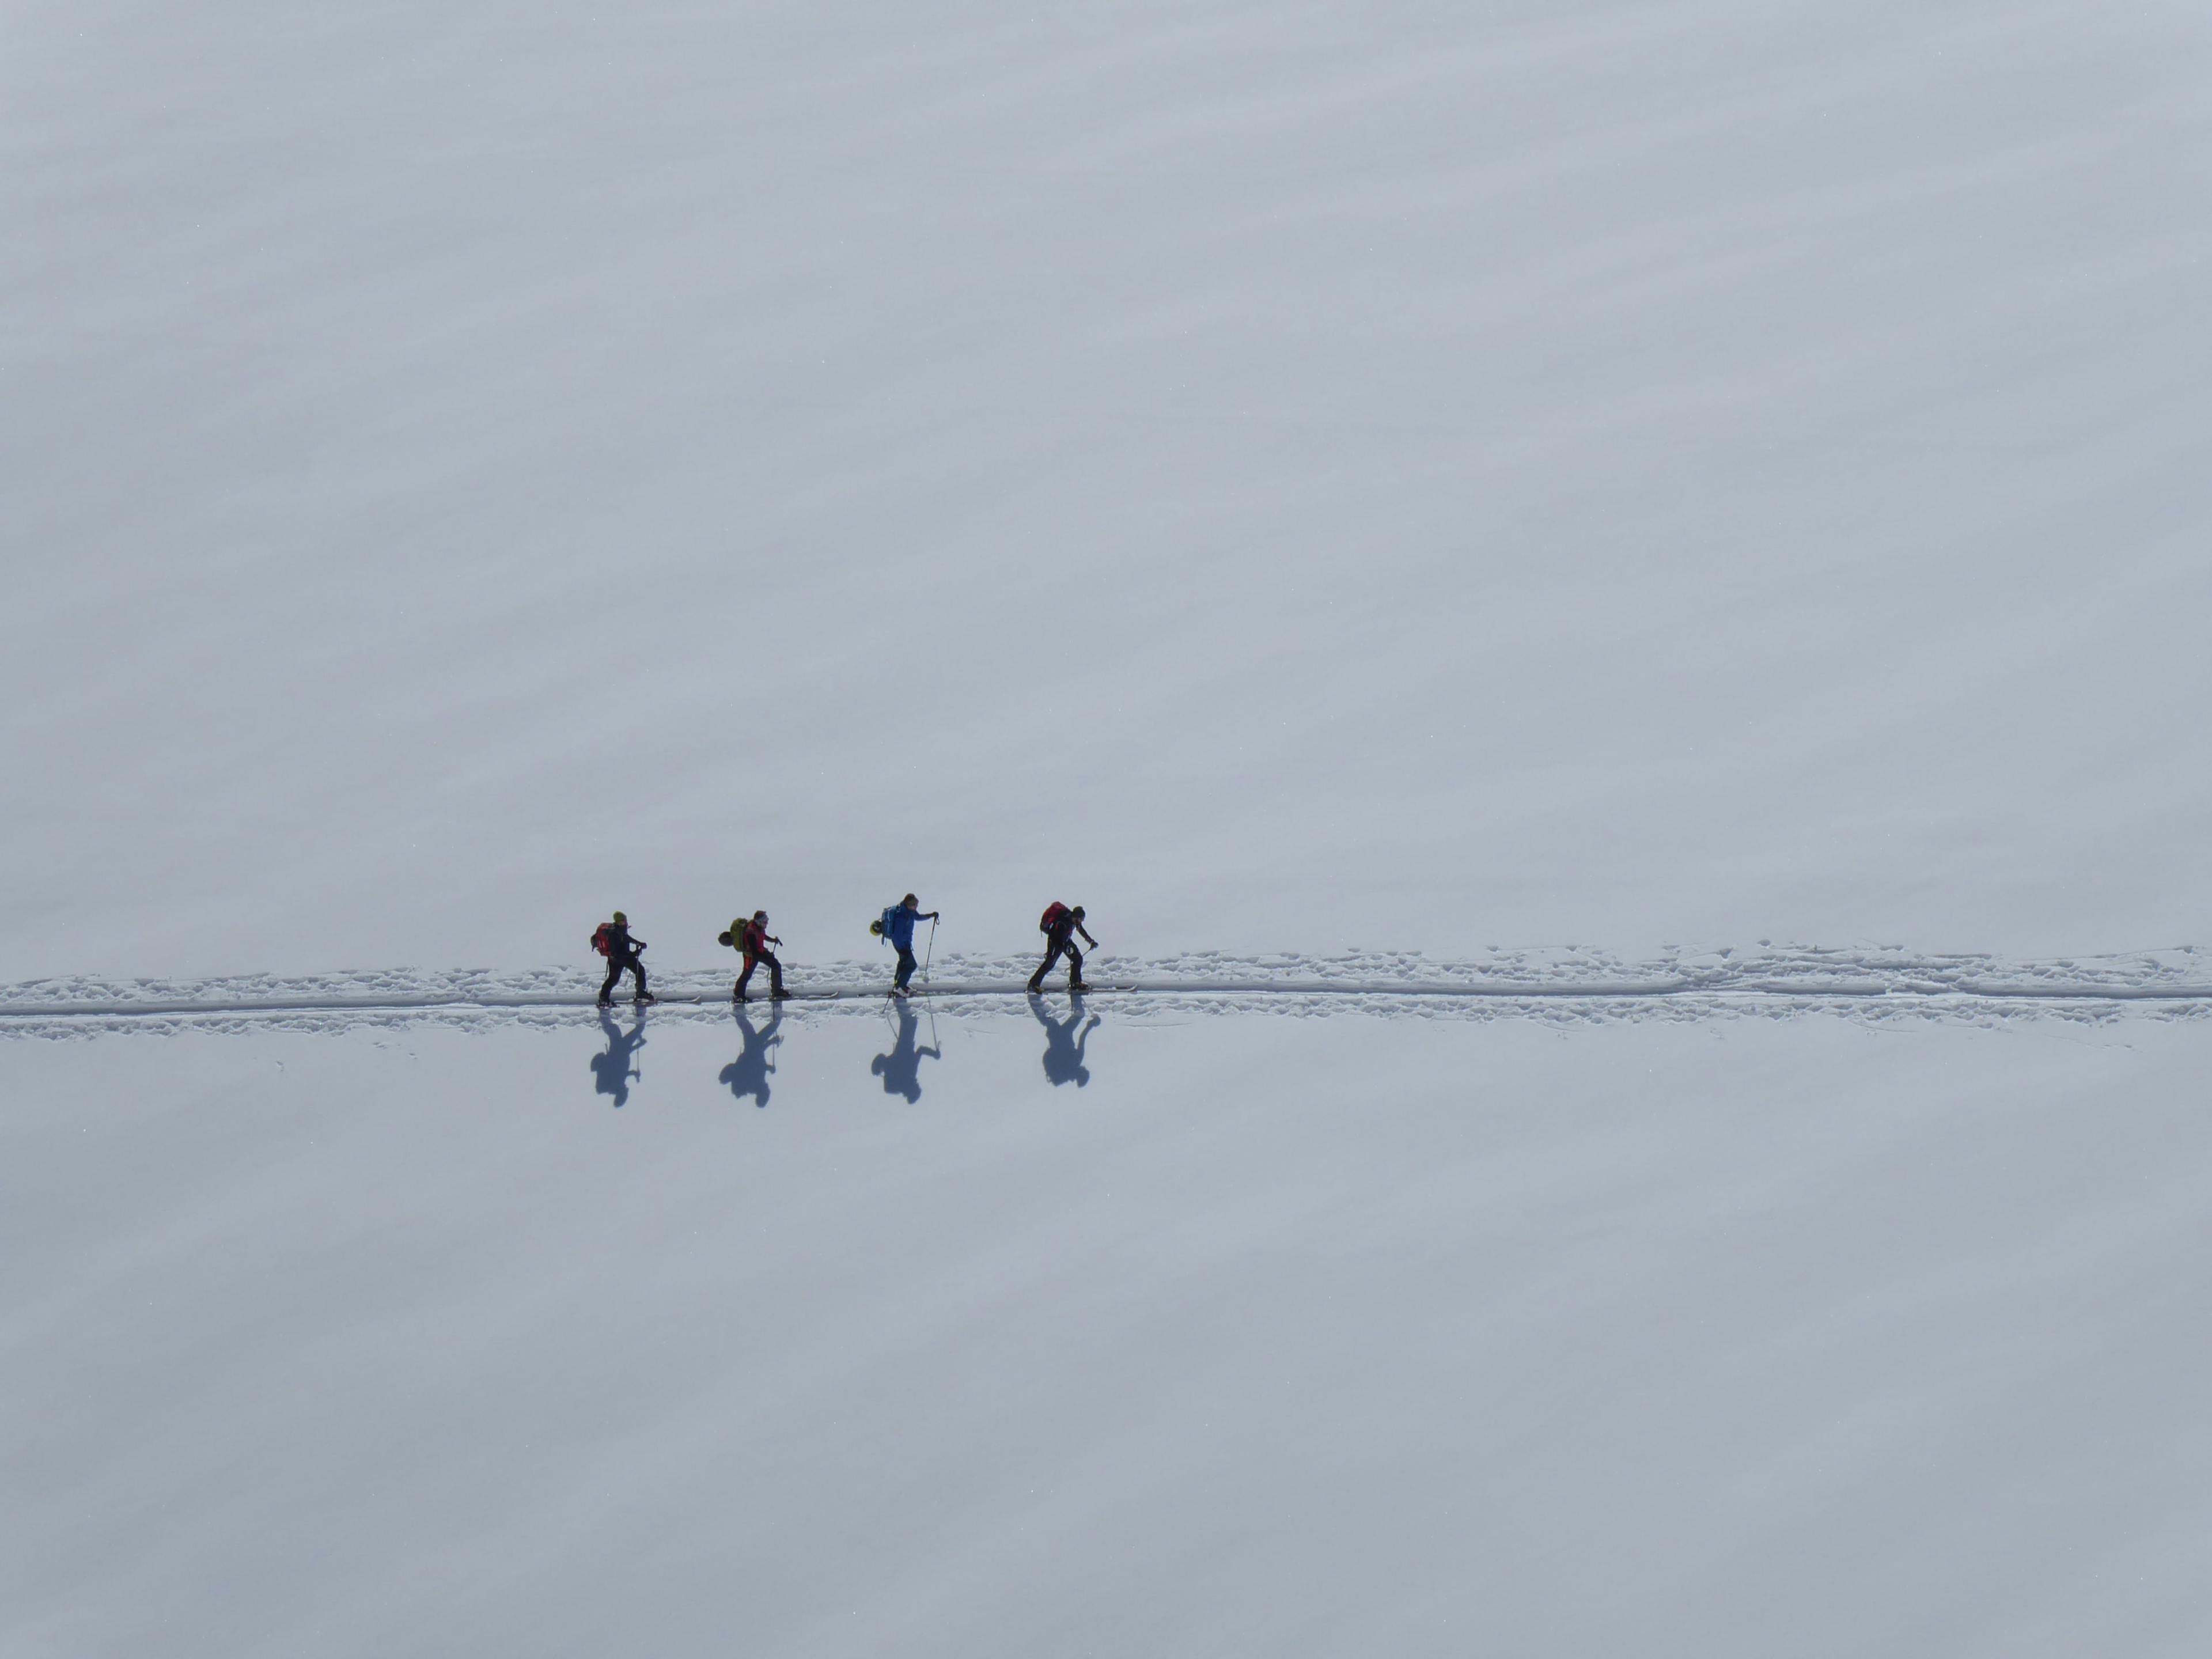 A group of 4 ski tourers from a drone